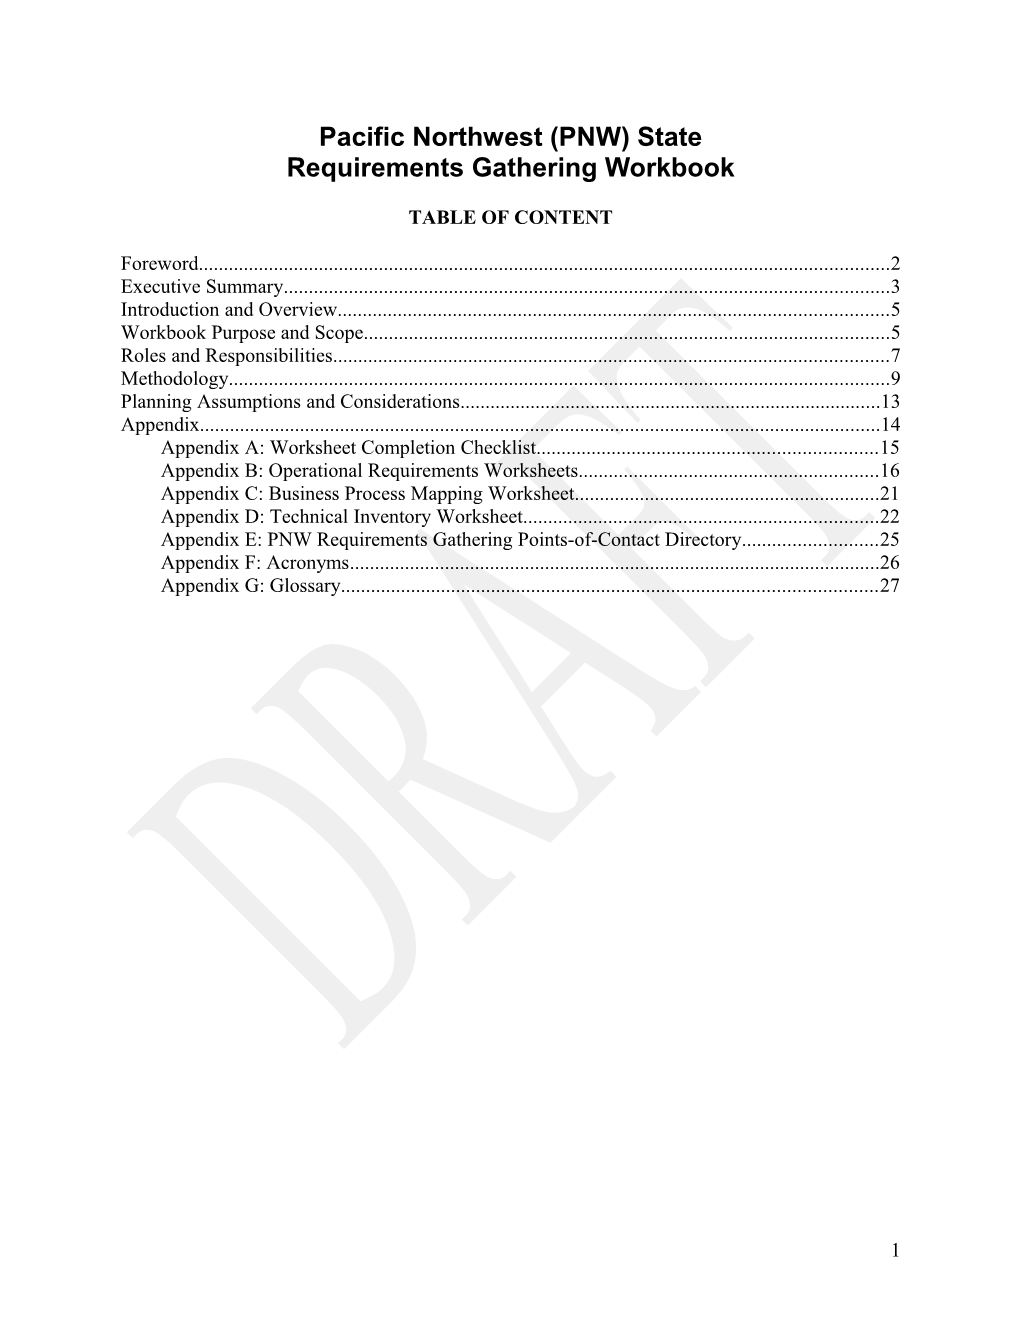 Pacific NW Pilot - States Requirements Gathering Workbook